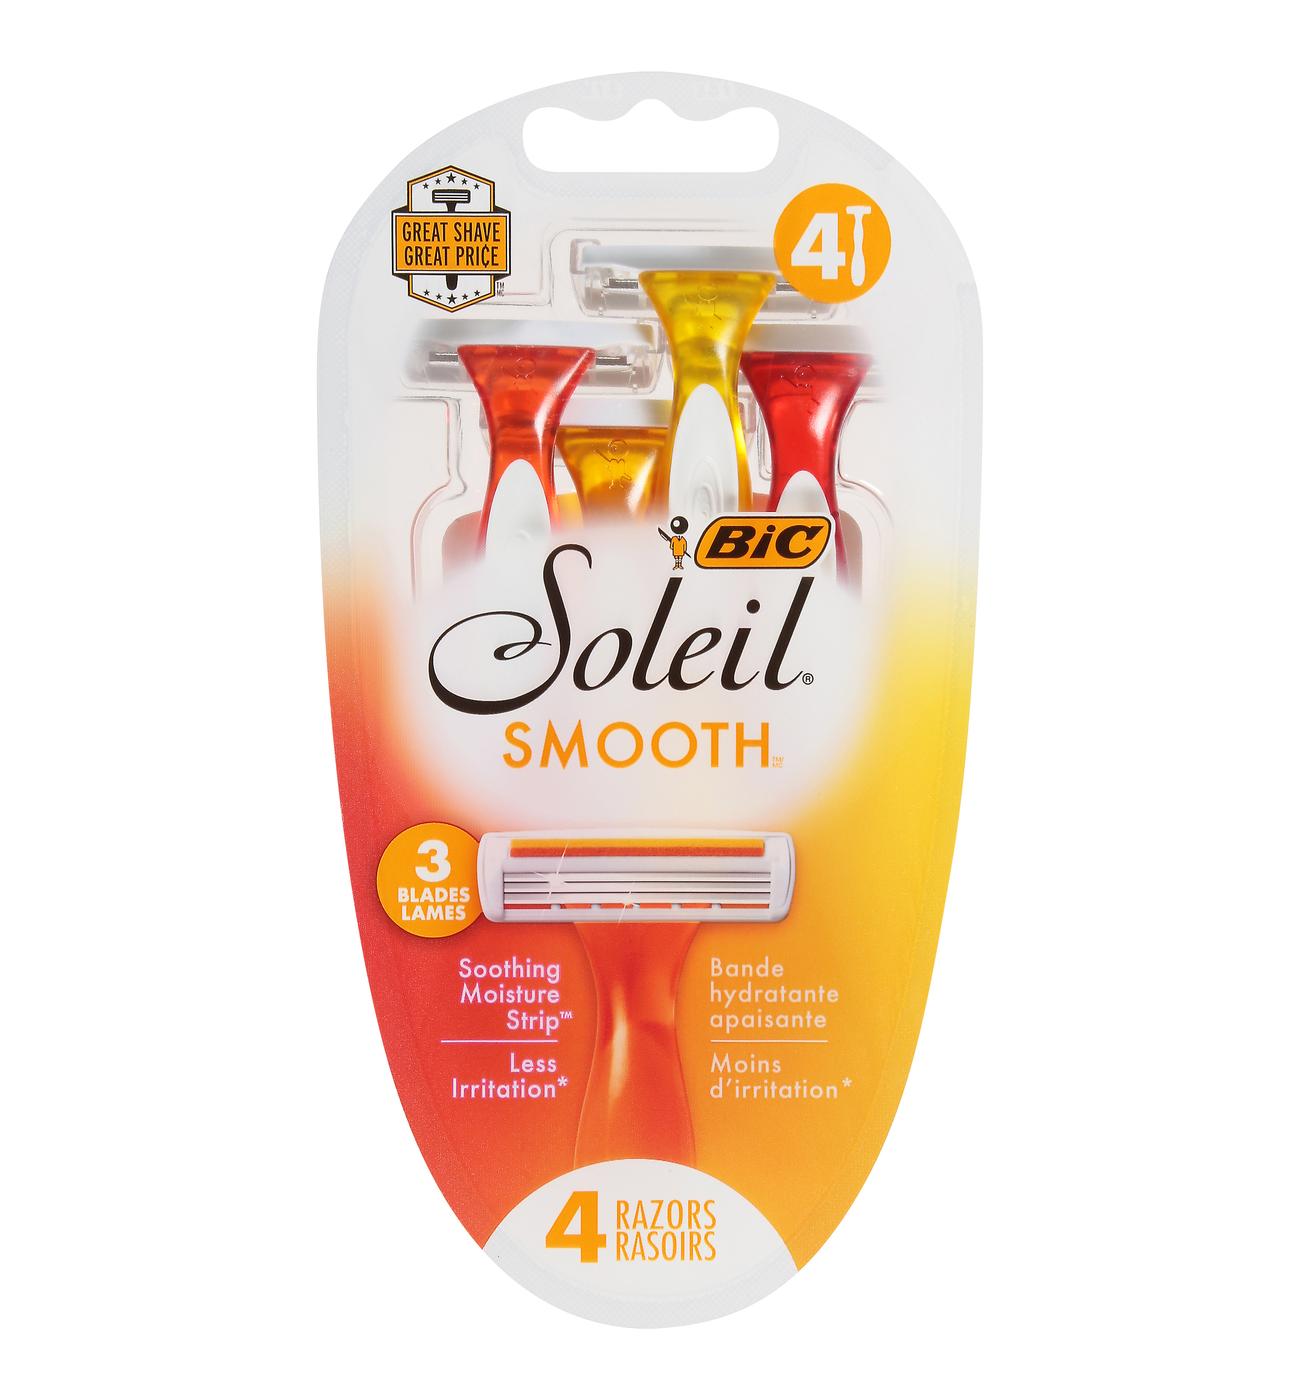 BIC Soleil Smooth 3 Blades Disposable Razors; image 1 of 4